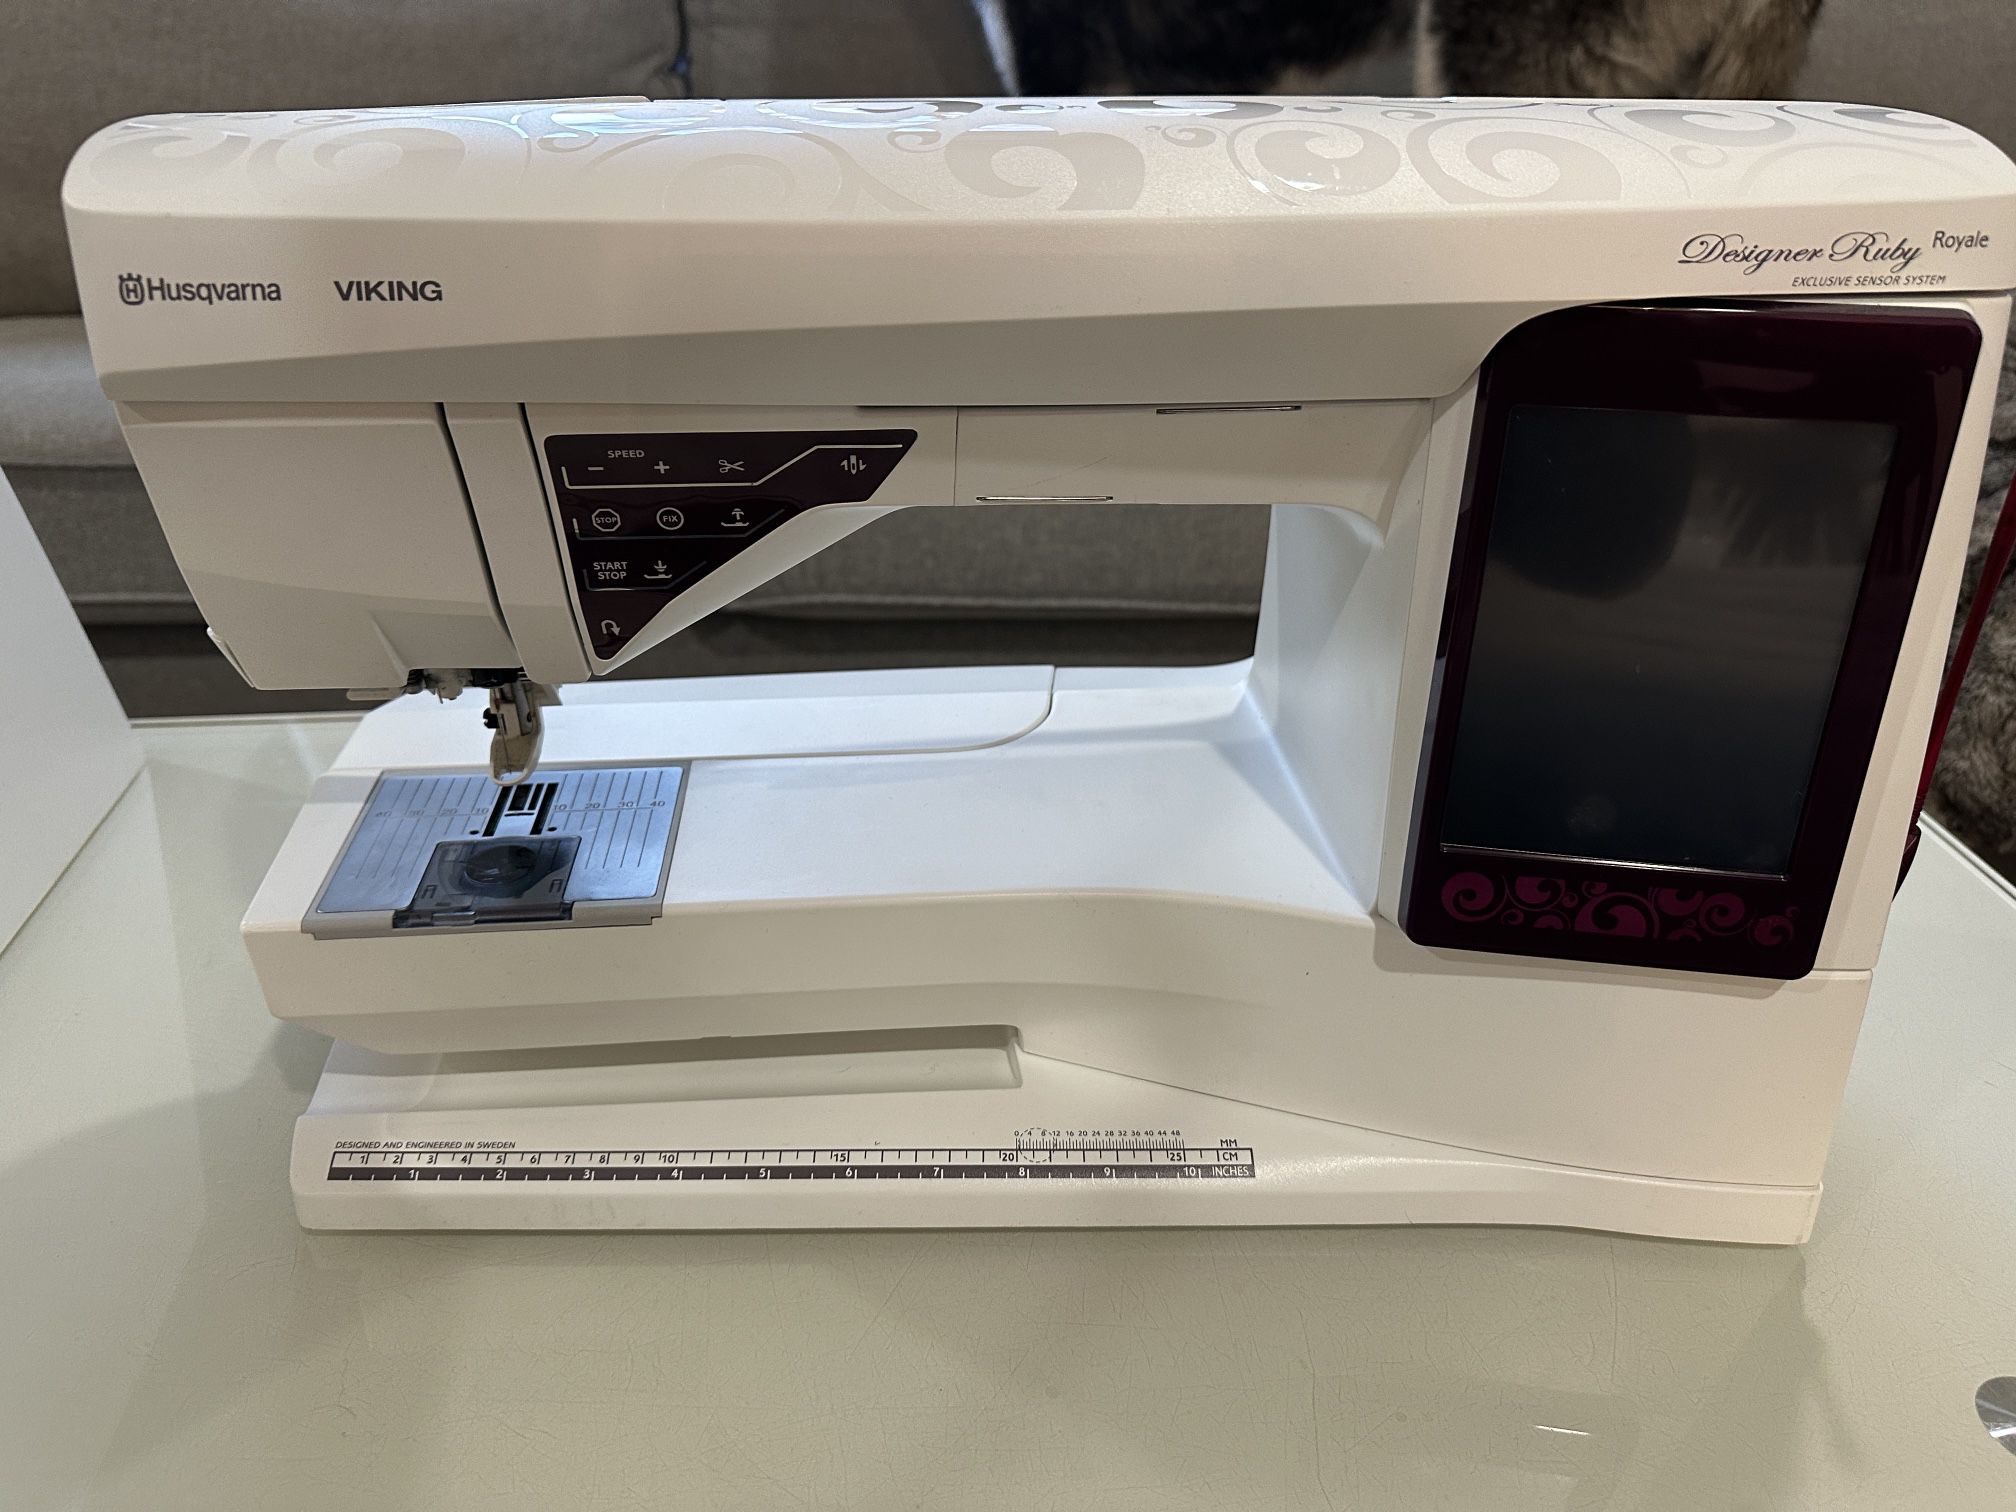 Husqvarna VIKING DESIGNER RUBY Royale Sewing and Embroidery Machine